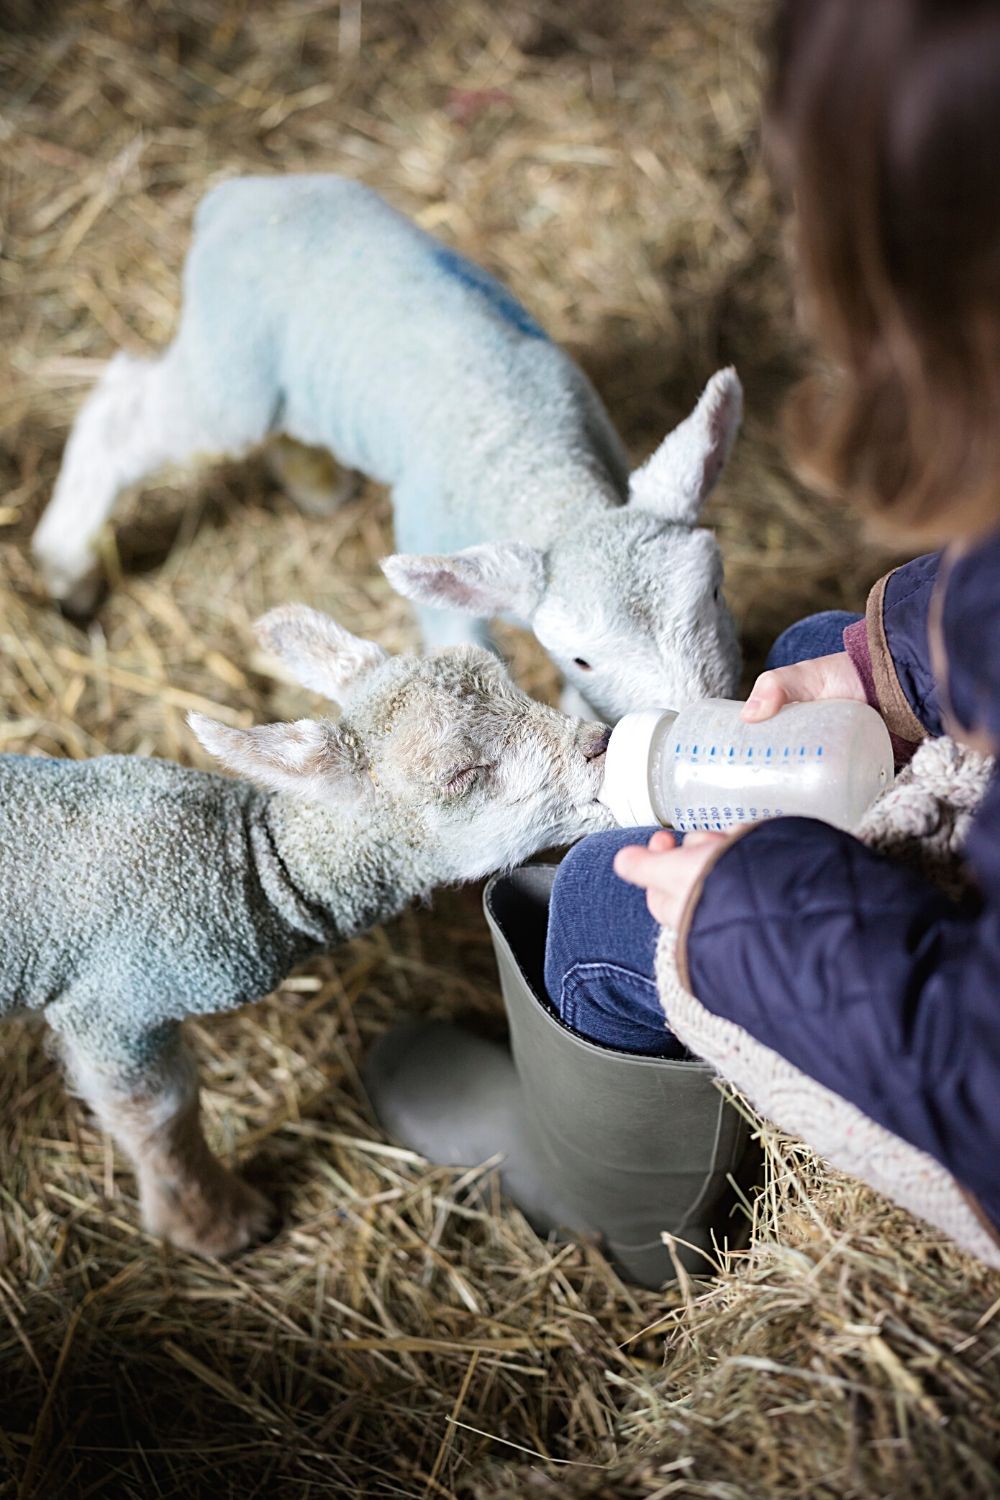 Don't overfeed an orphaned baby lamb when you're bottle-feeding it; feed it every 2-3 hours